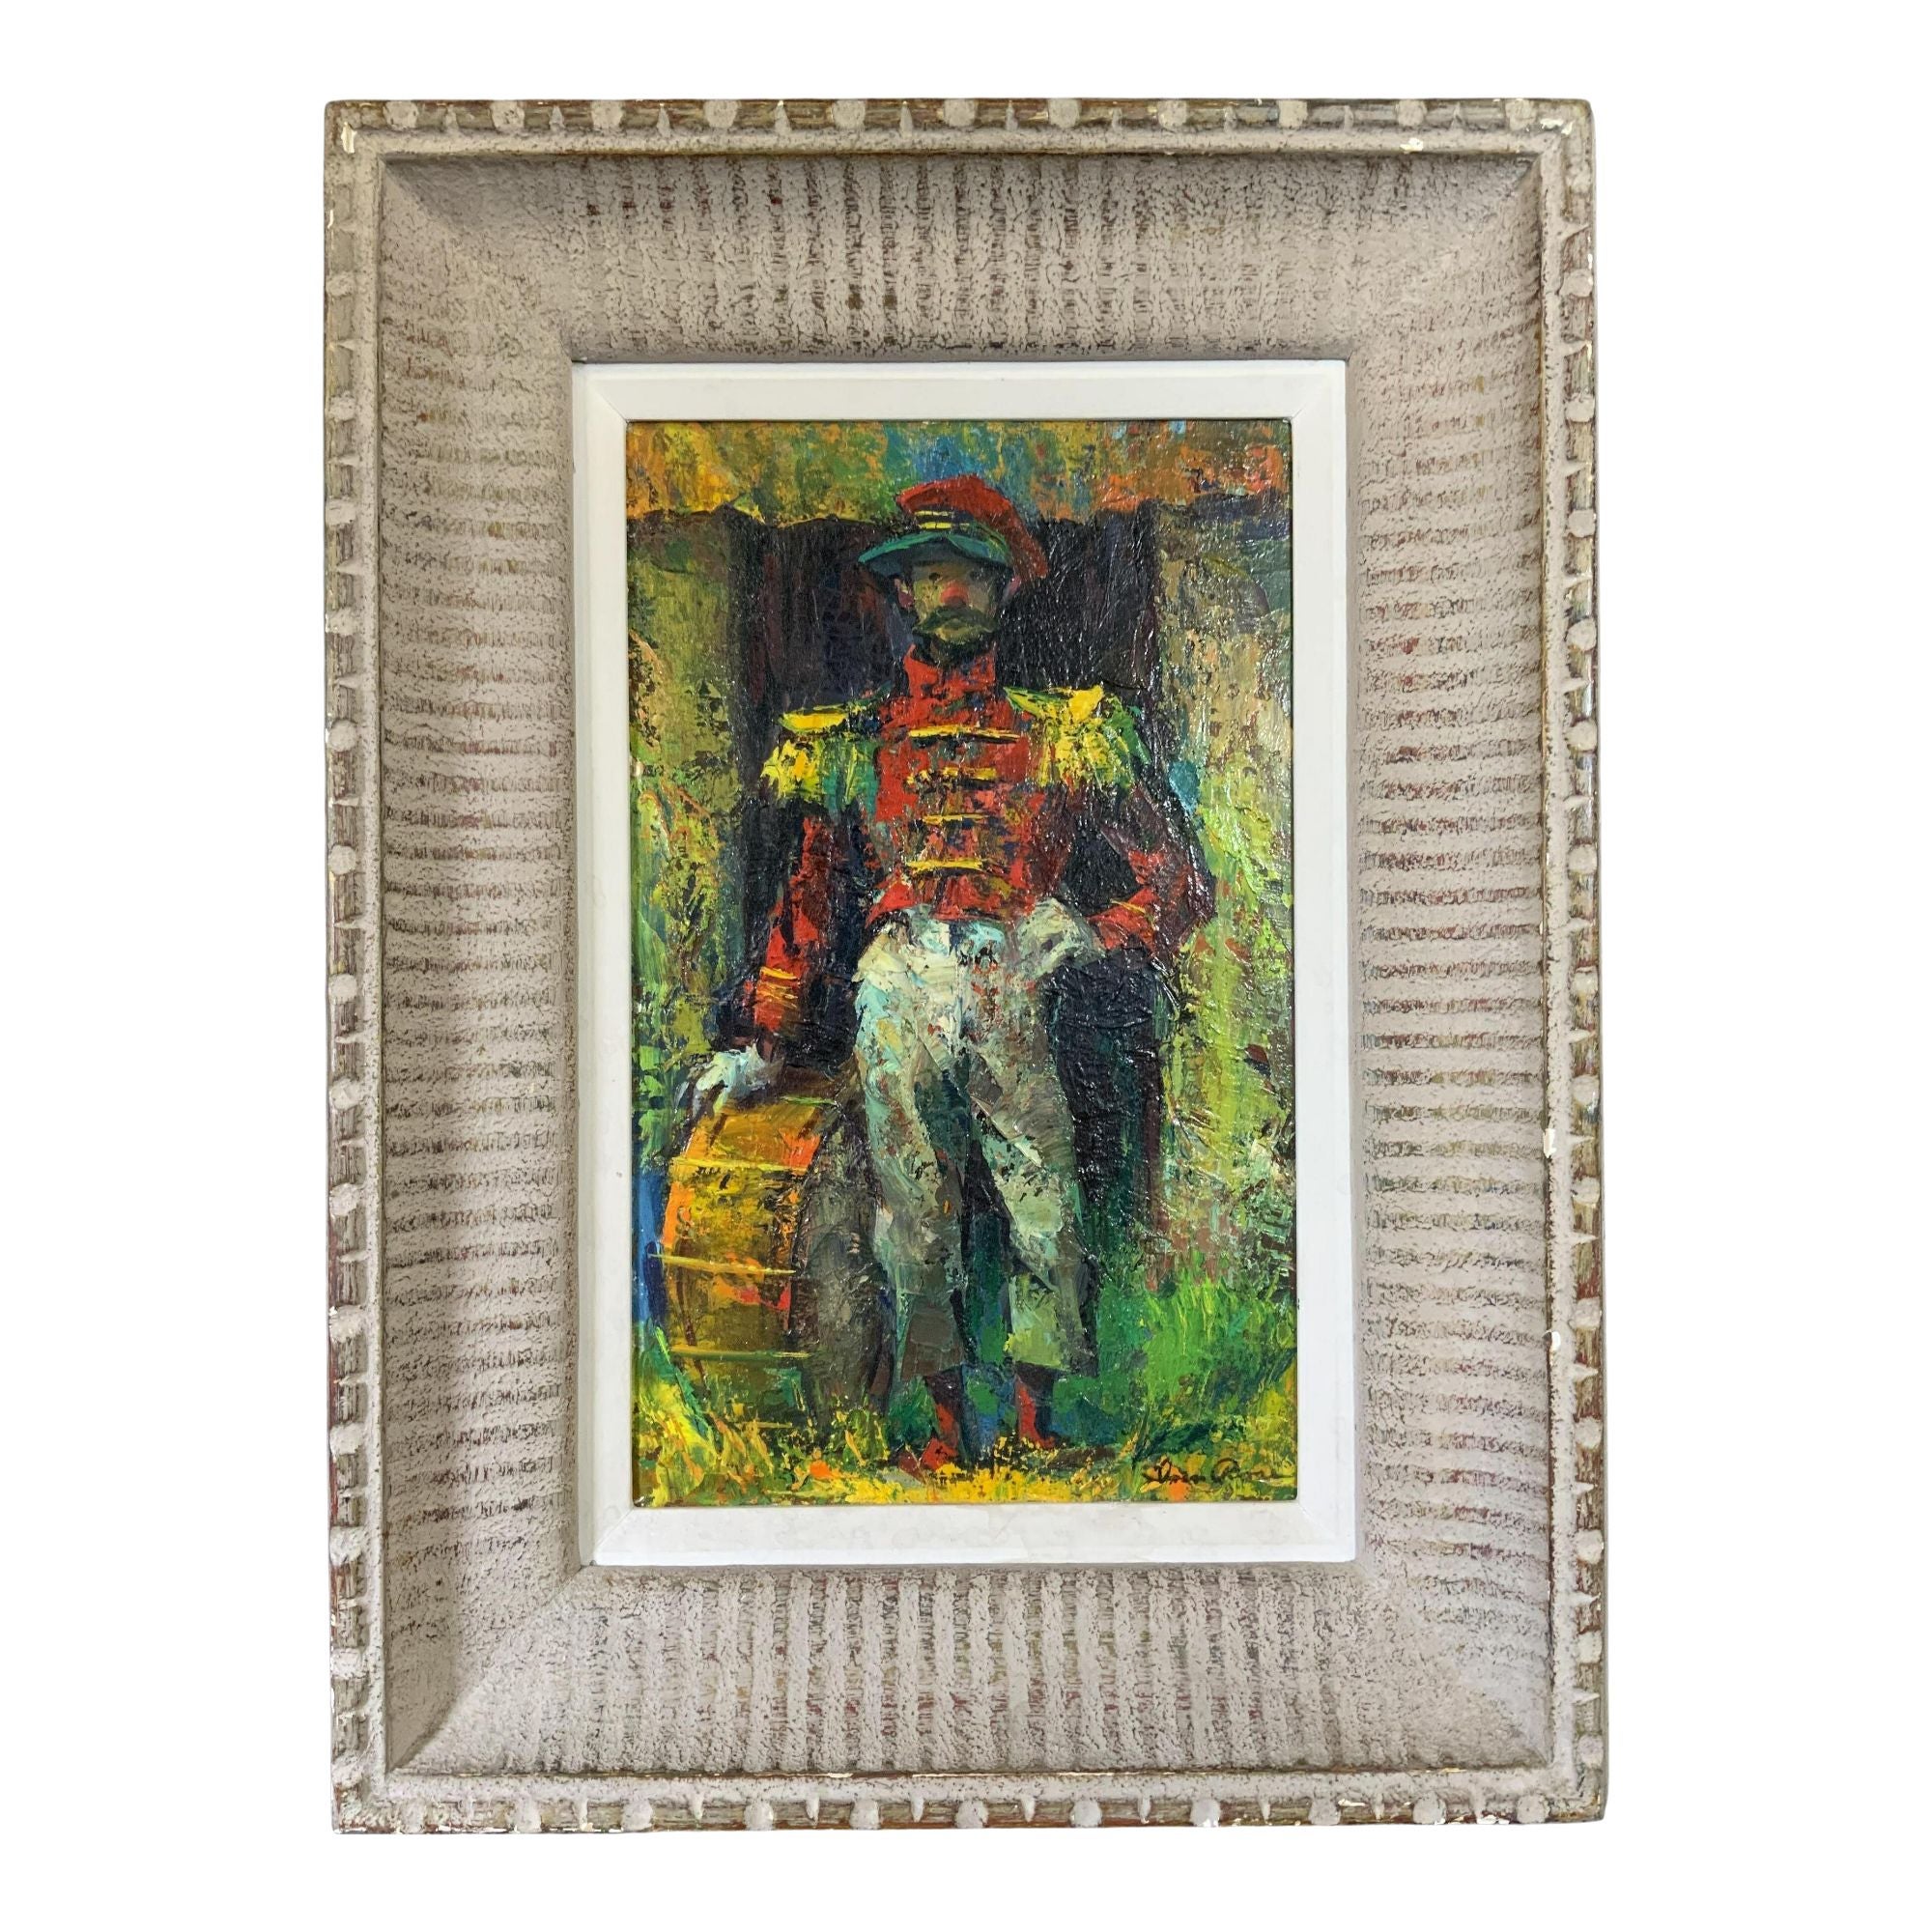 Vintage Mid-Century Modern Iver Rose Oil Painting of a Clown Soldier